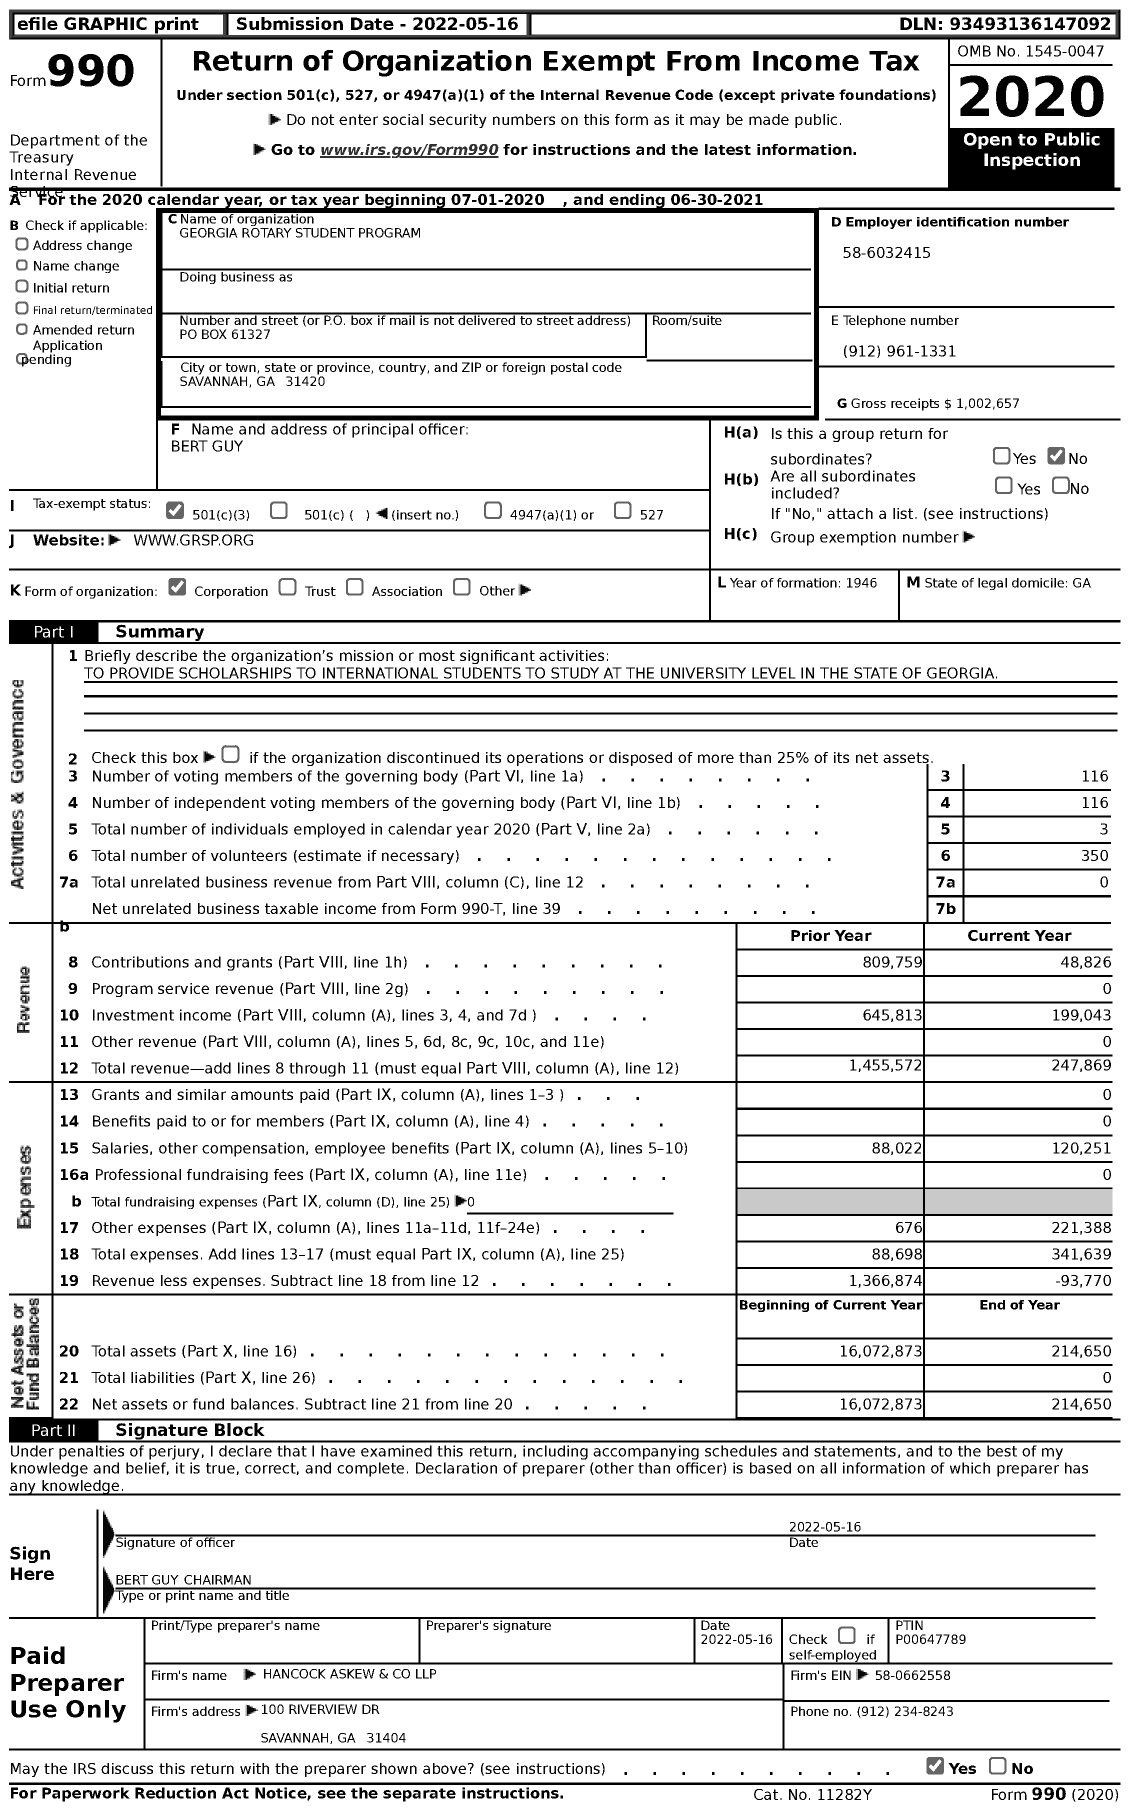 Image of first page of 2020 Form 990 for Georgia Rotary Student Program